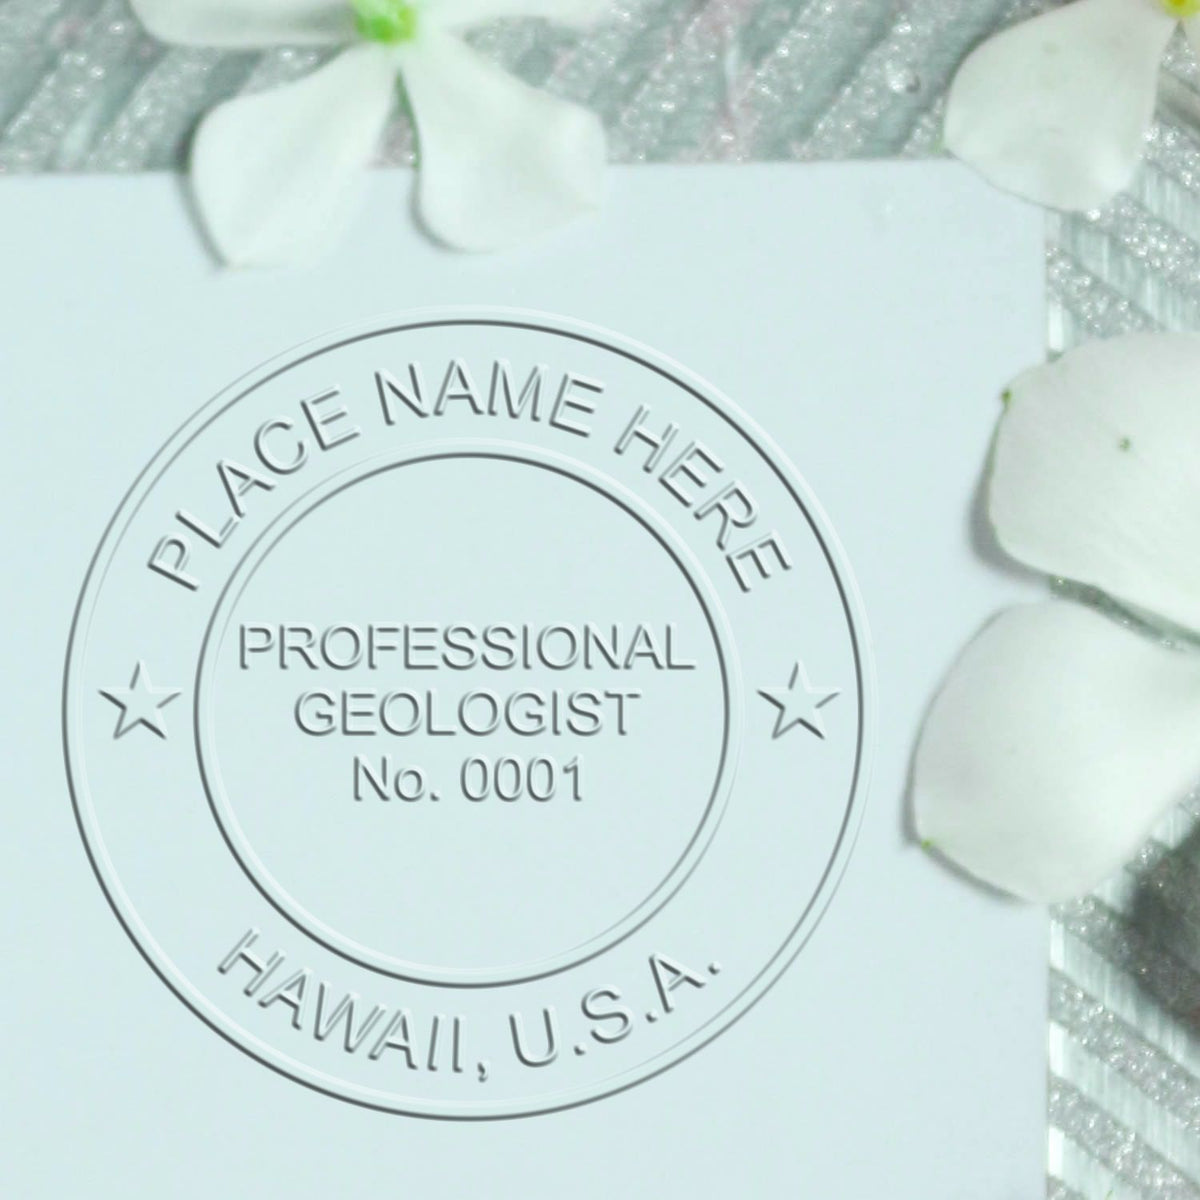 An alternative view of the Soft Hawaii Professional Geologist Seal stamped on a sheet of paper showing the image in use